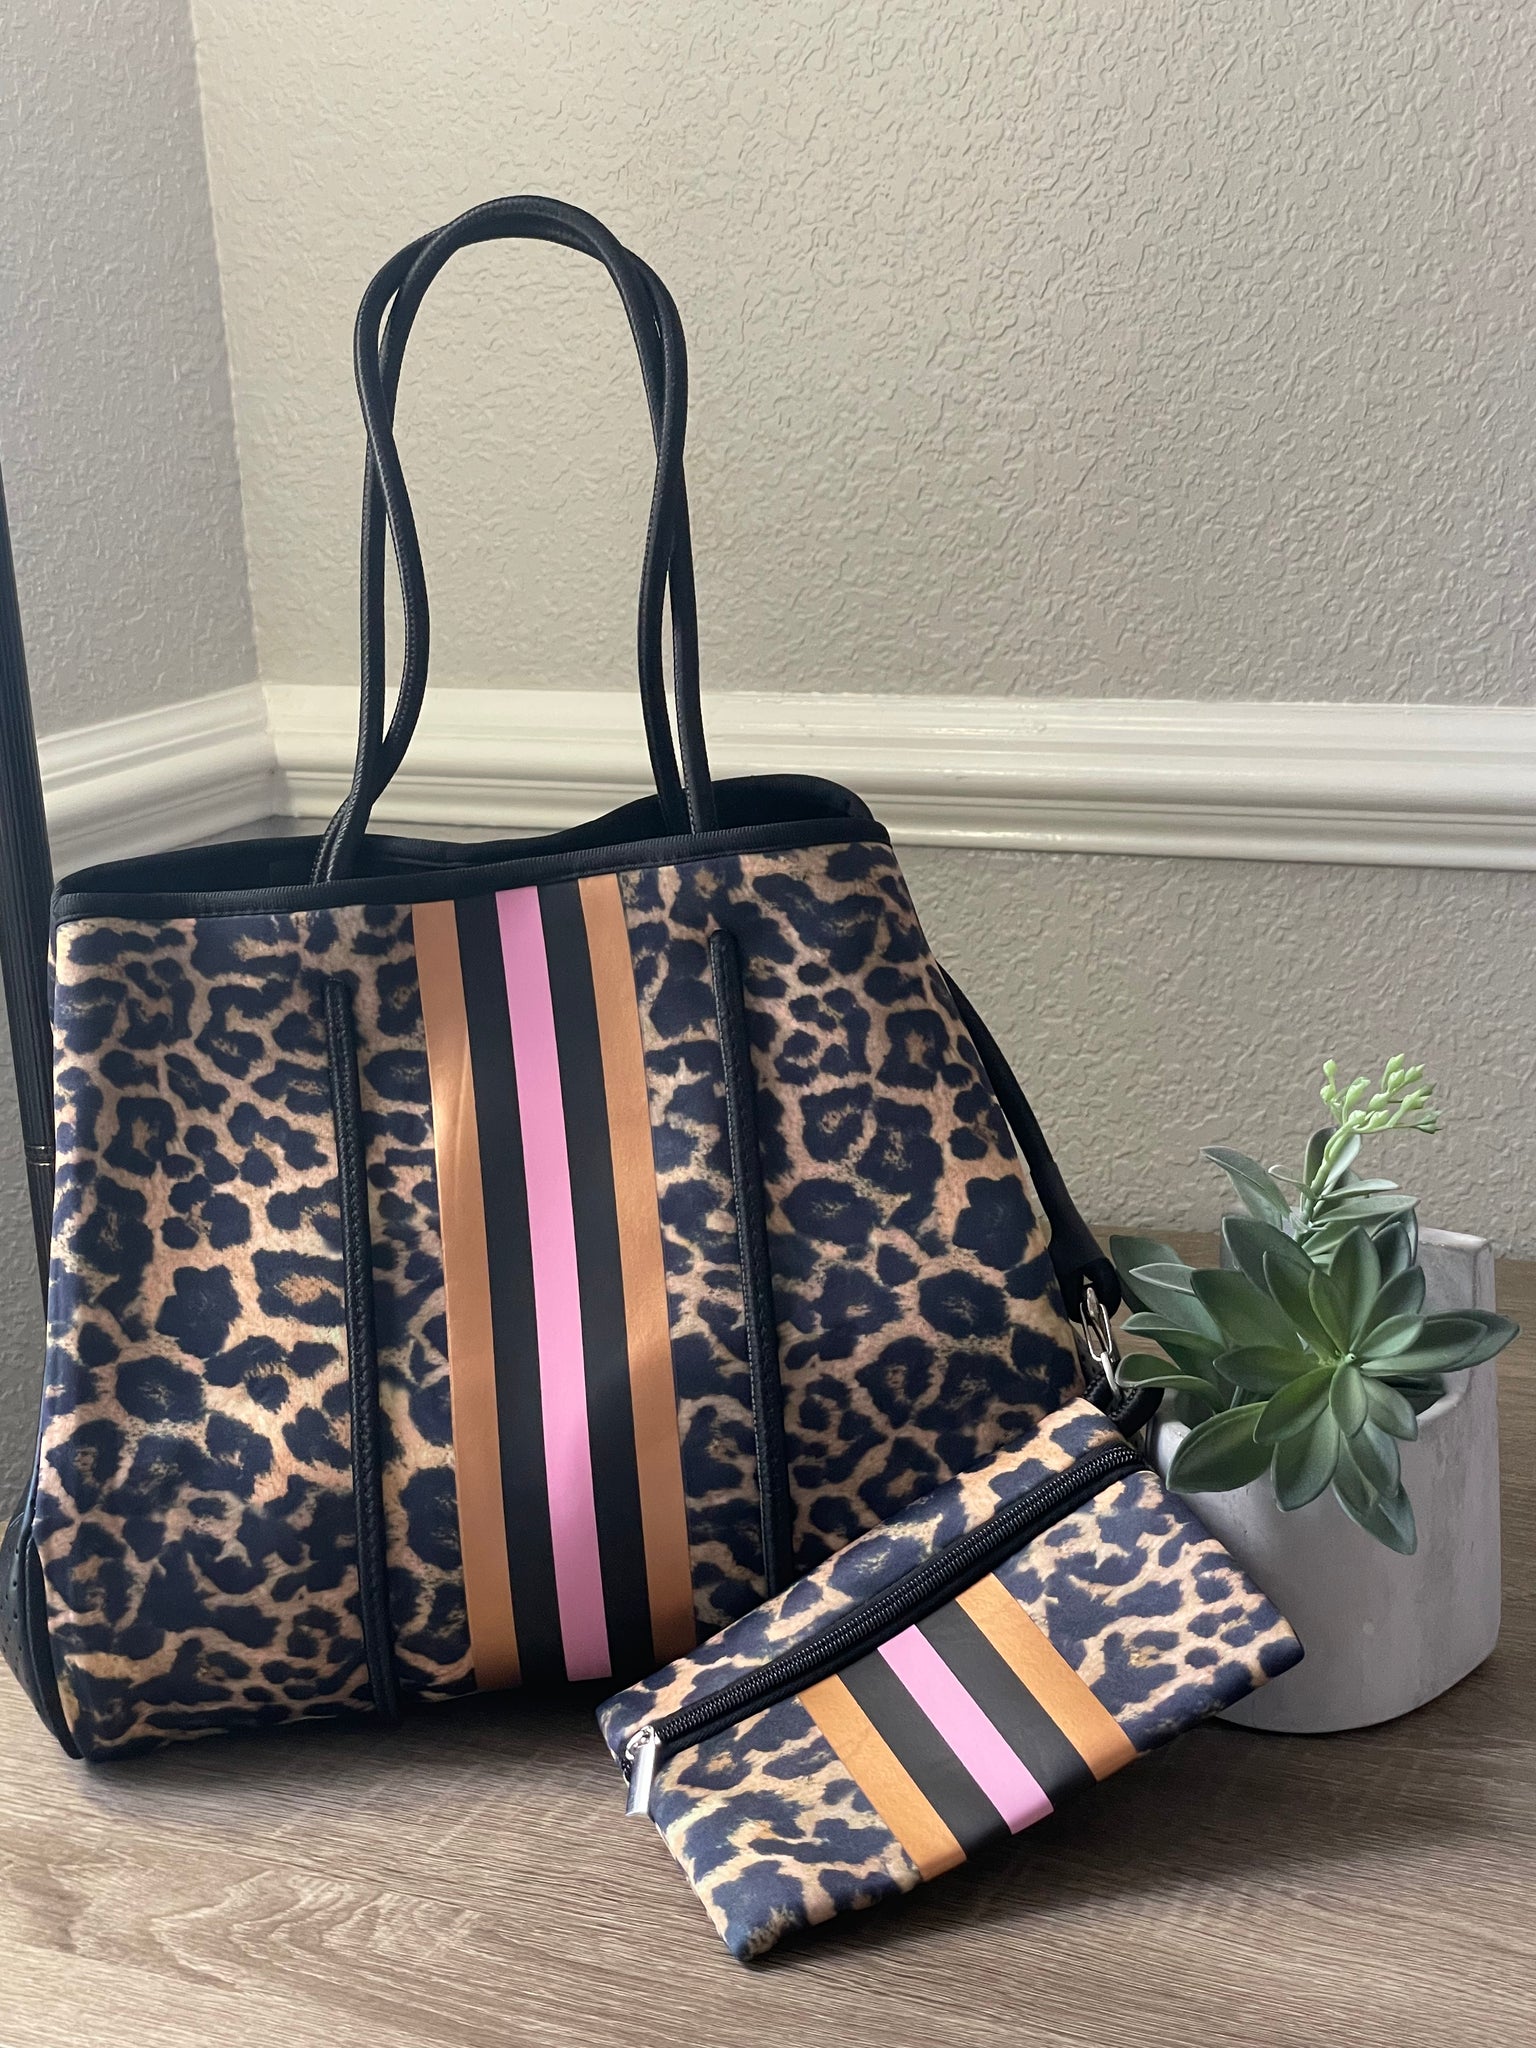 Neoprene Tote Bag Brown Leopard with Gold/Pink Stripe